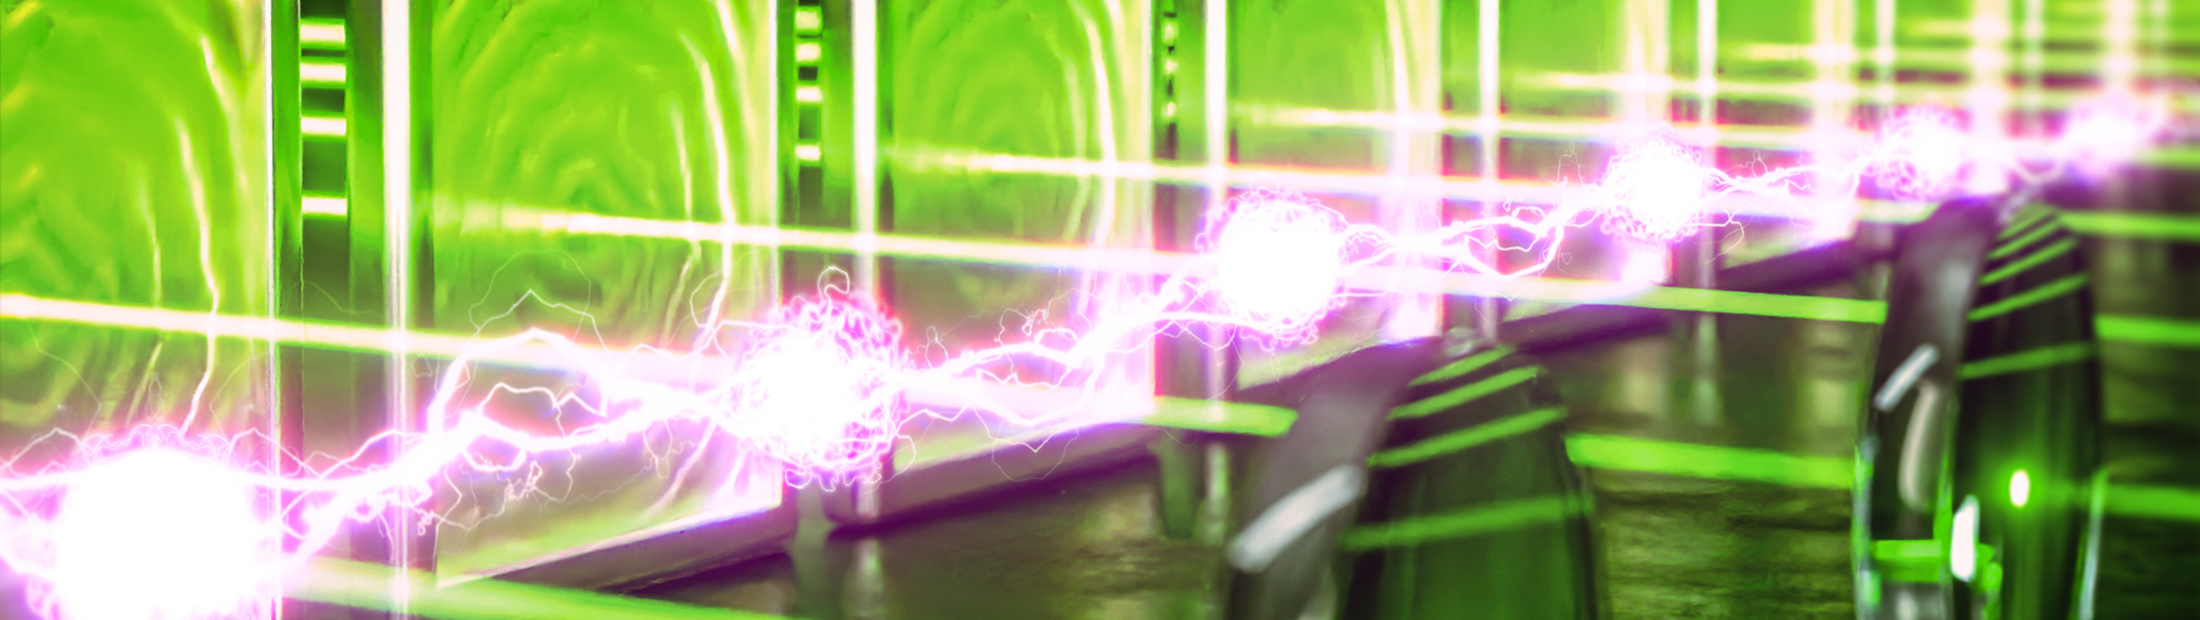 An artistic rendering of green lasers and purple light